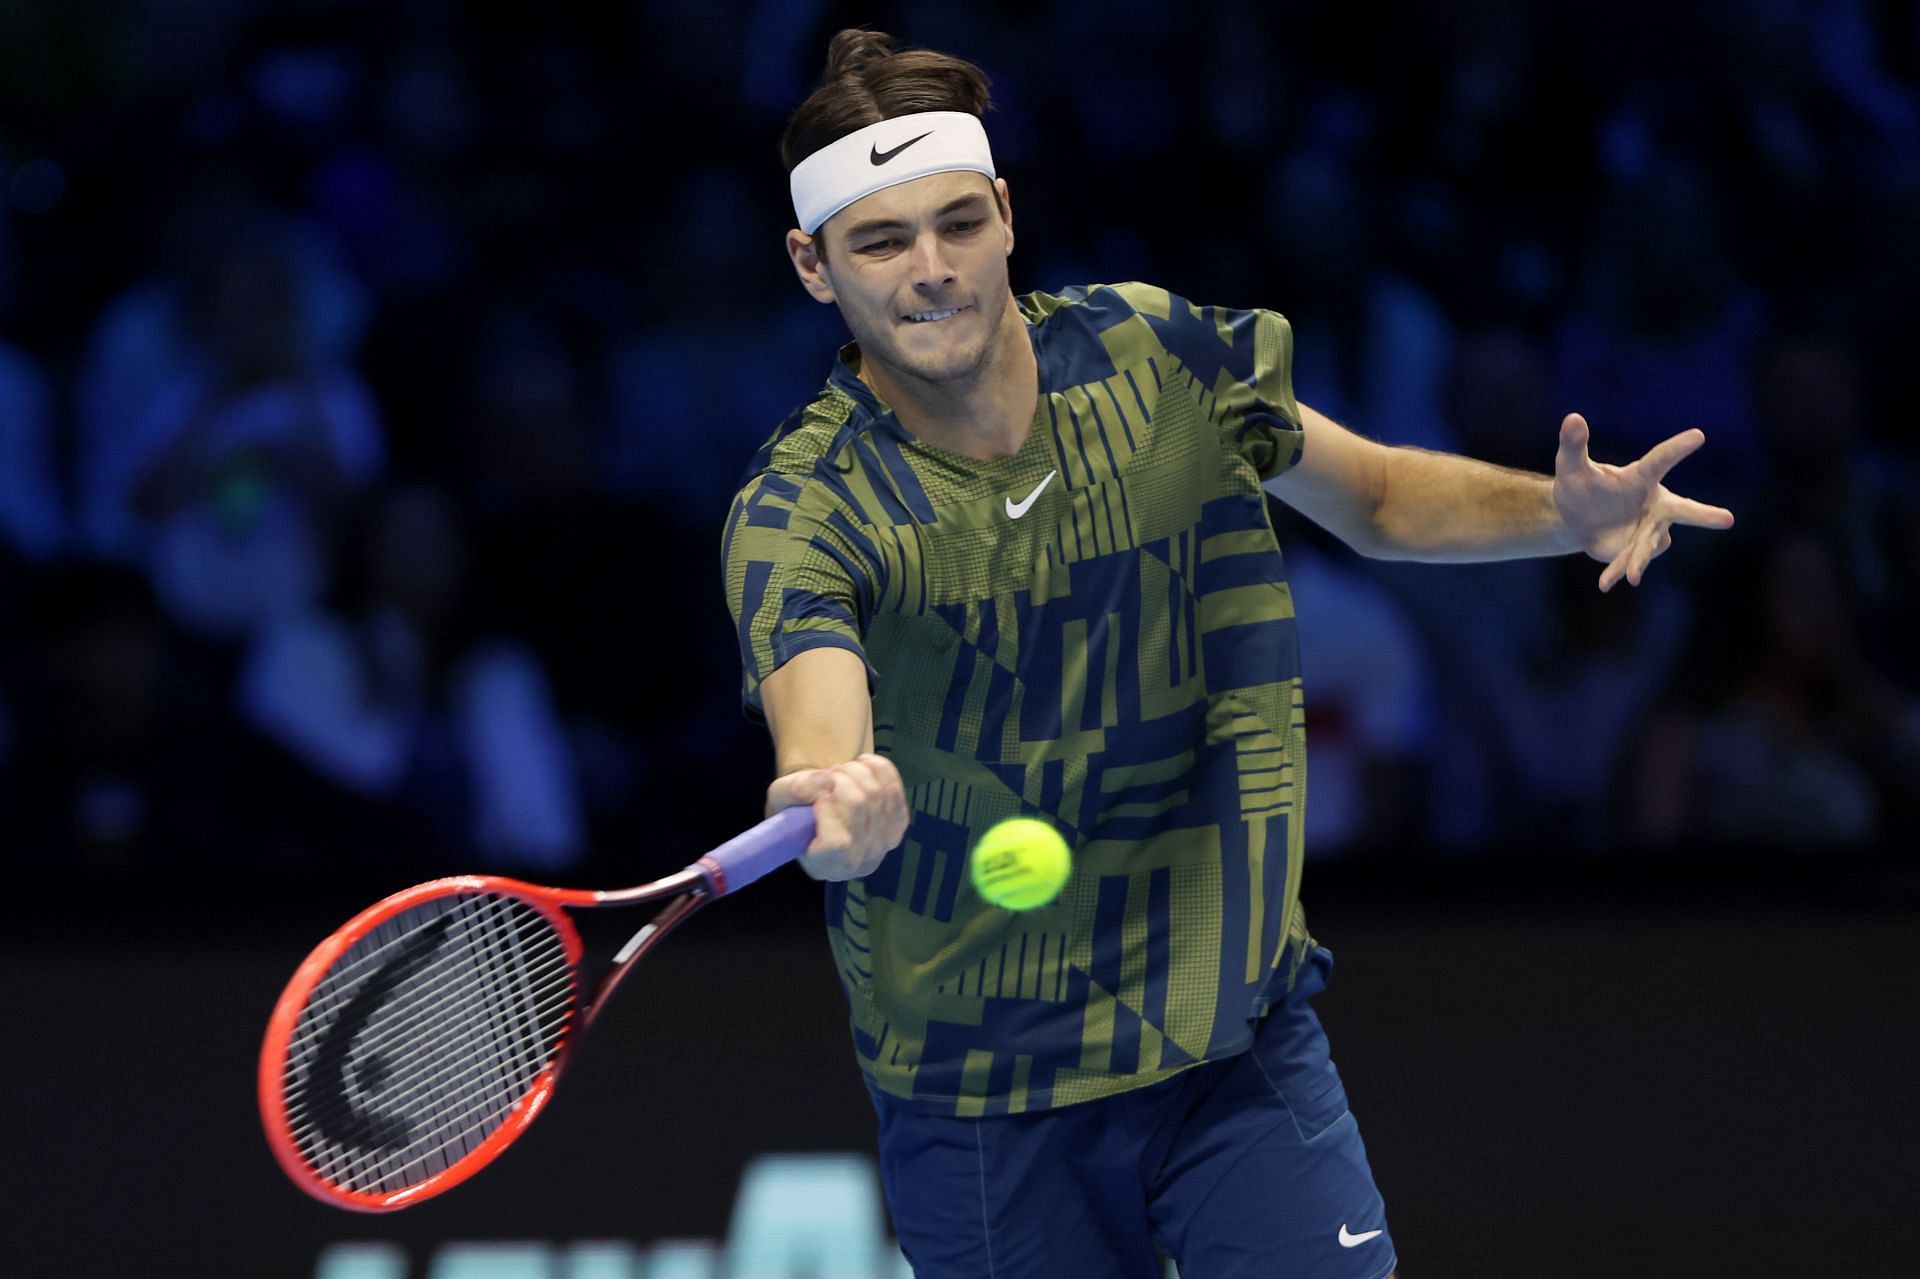 Taylor Fritz returns a shot to Rafael Nadal during their round-robin match at the Nitto ATP Finals